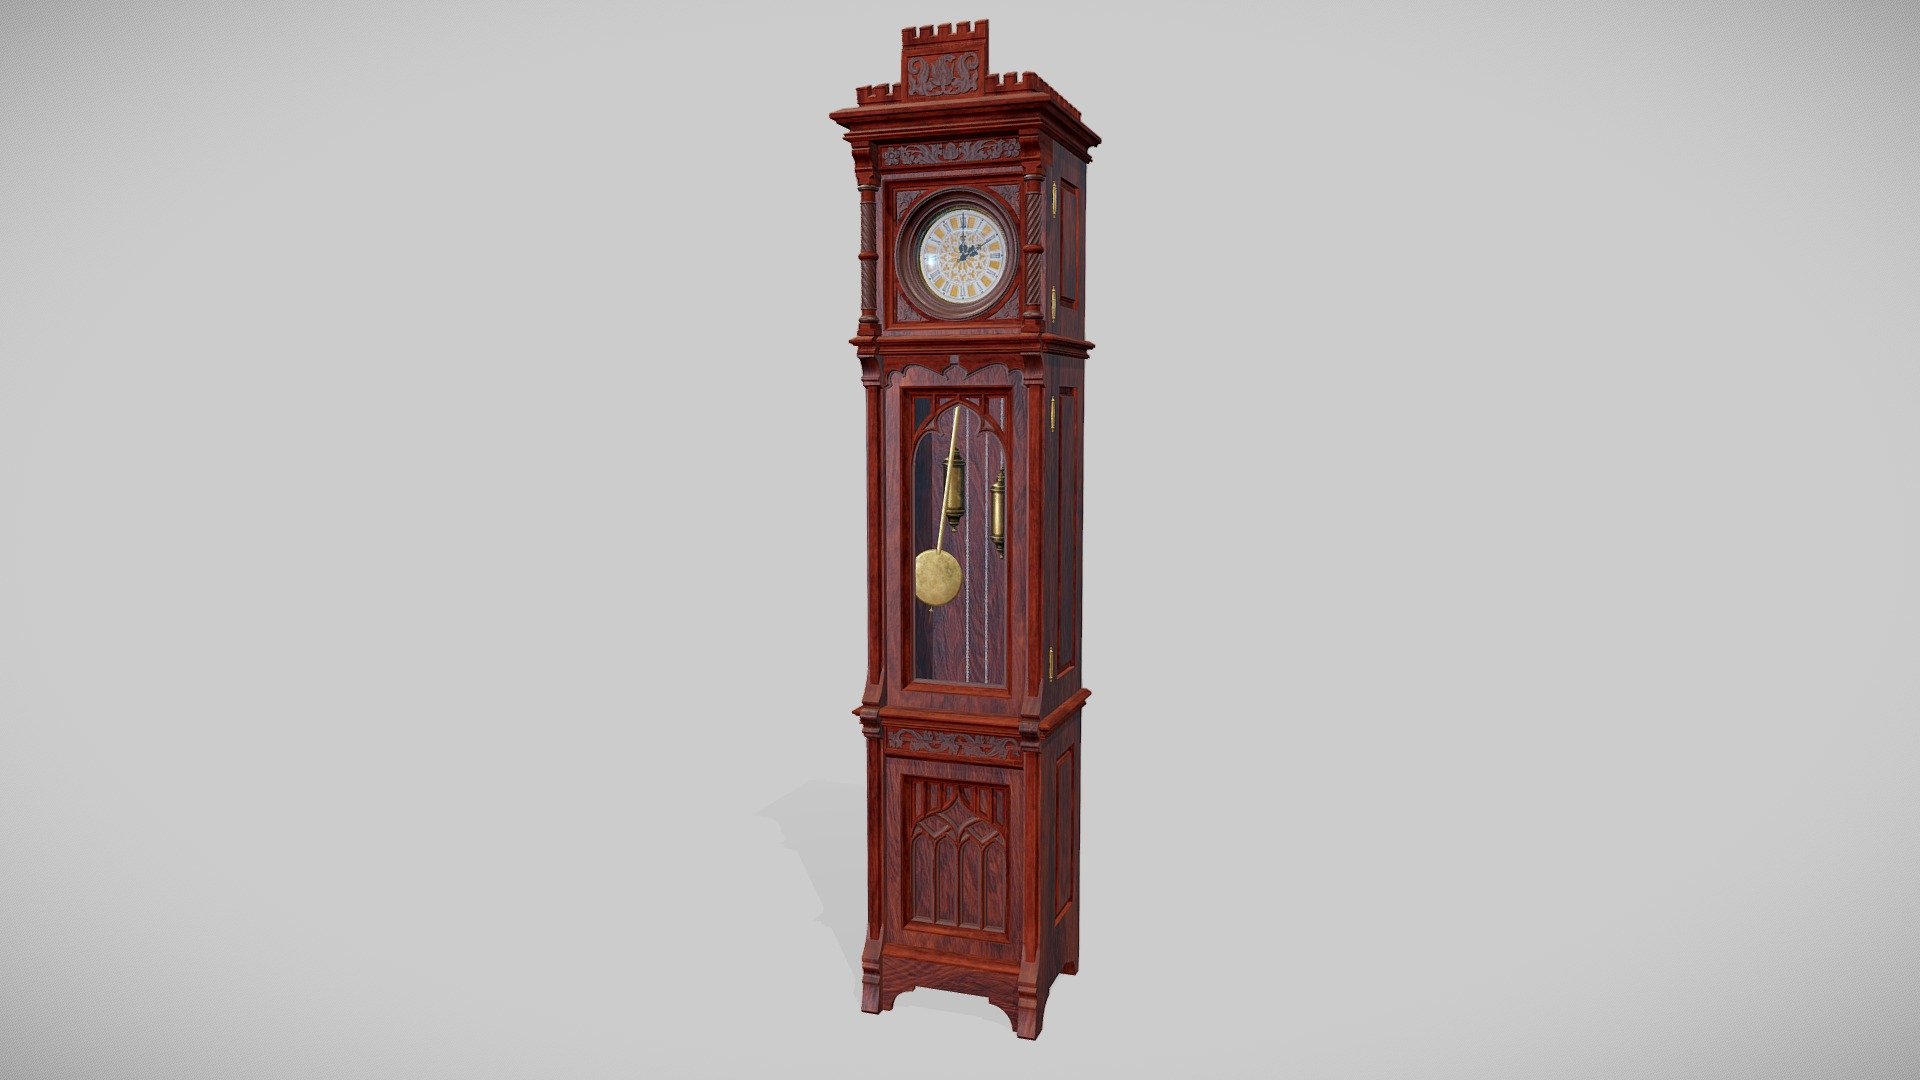 Decorated Victorian longcase clocks with movable pendulum and hands. The middle part of case  is openable and contains clockwork with weights on chains and pendulum. The upper part is also openable and contain clock face with movable hands. As a material for case, we chose acacia wood in light and dark variants to highlight the decorations. Model fits perfectly to any room or hallway  of the late 19th century.

Models have LODs and custom coliders for easy use as game props. Packed Ambient oclusion(R), roughness(G) and metalic(B) and unreal engine 4 project is also included 3d model